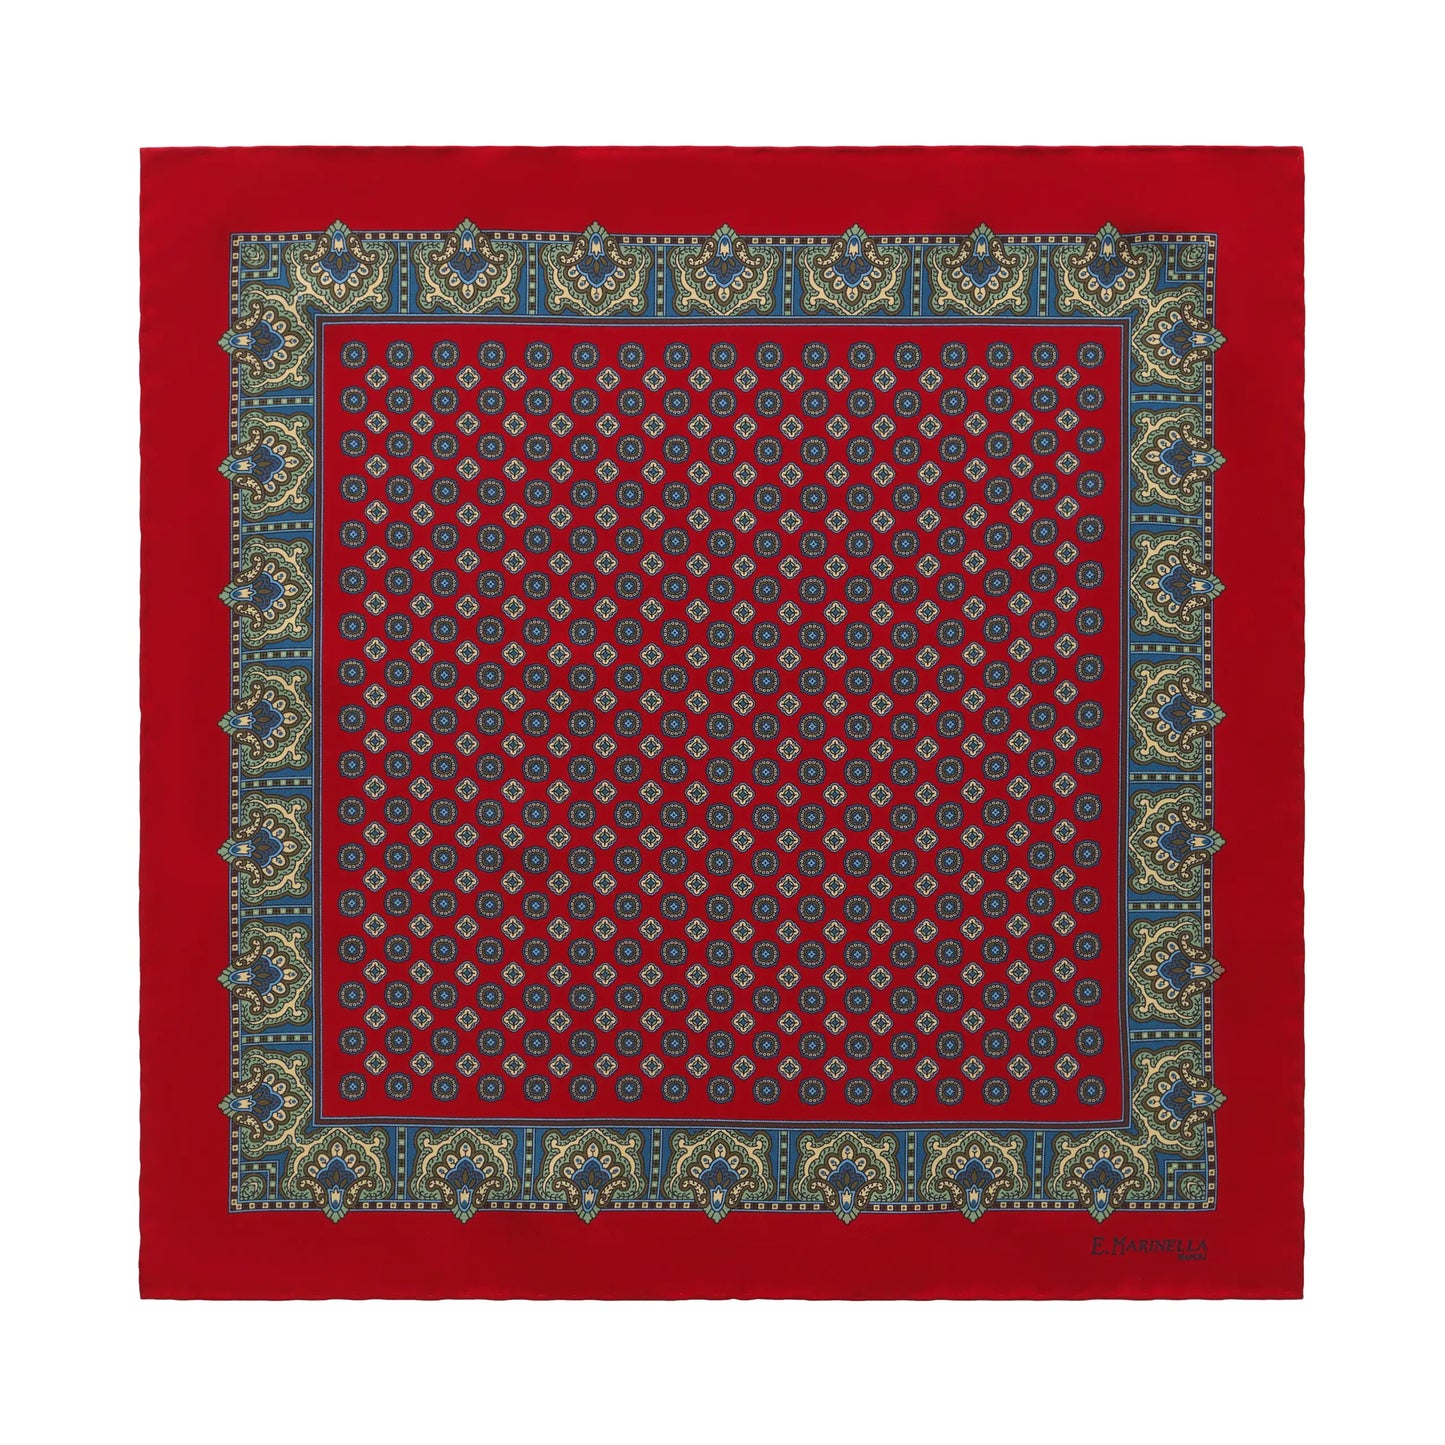 Printed Silk Pocket Square in Red